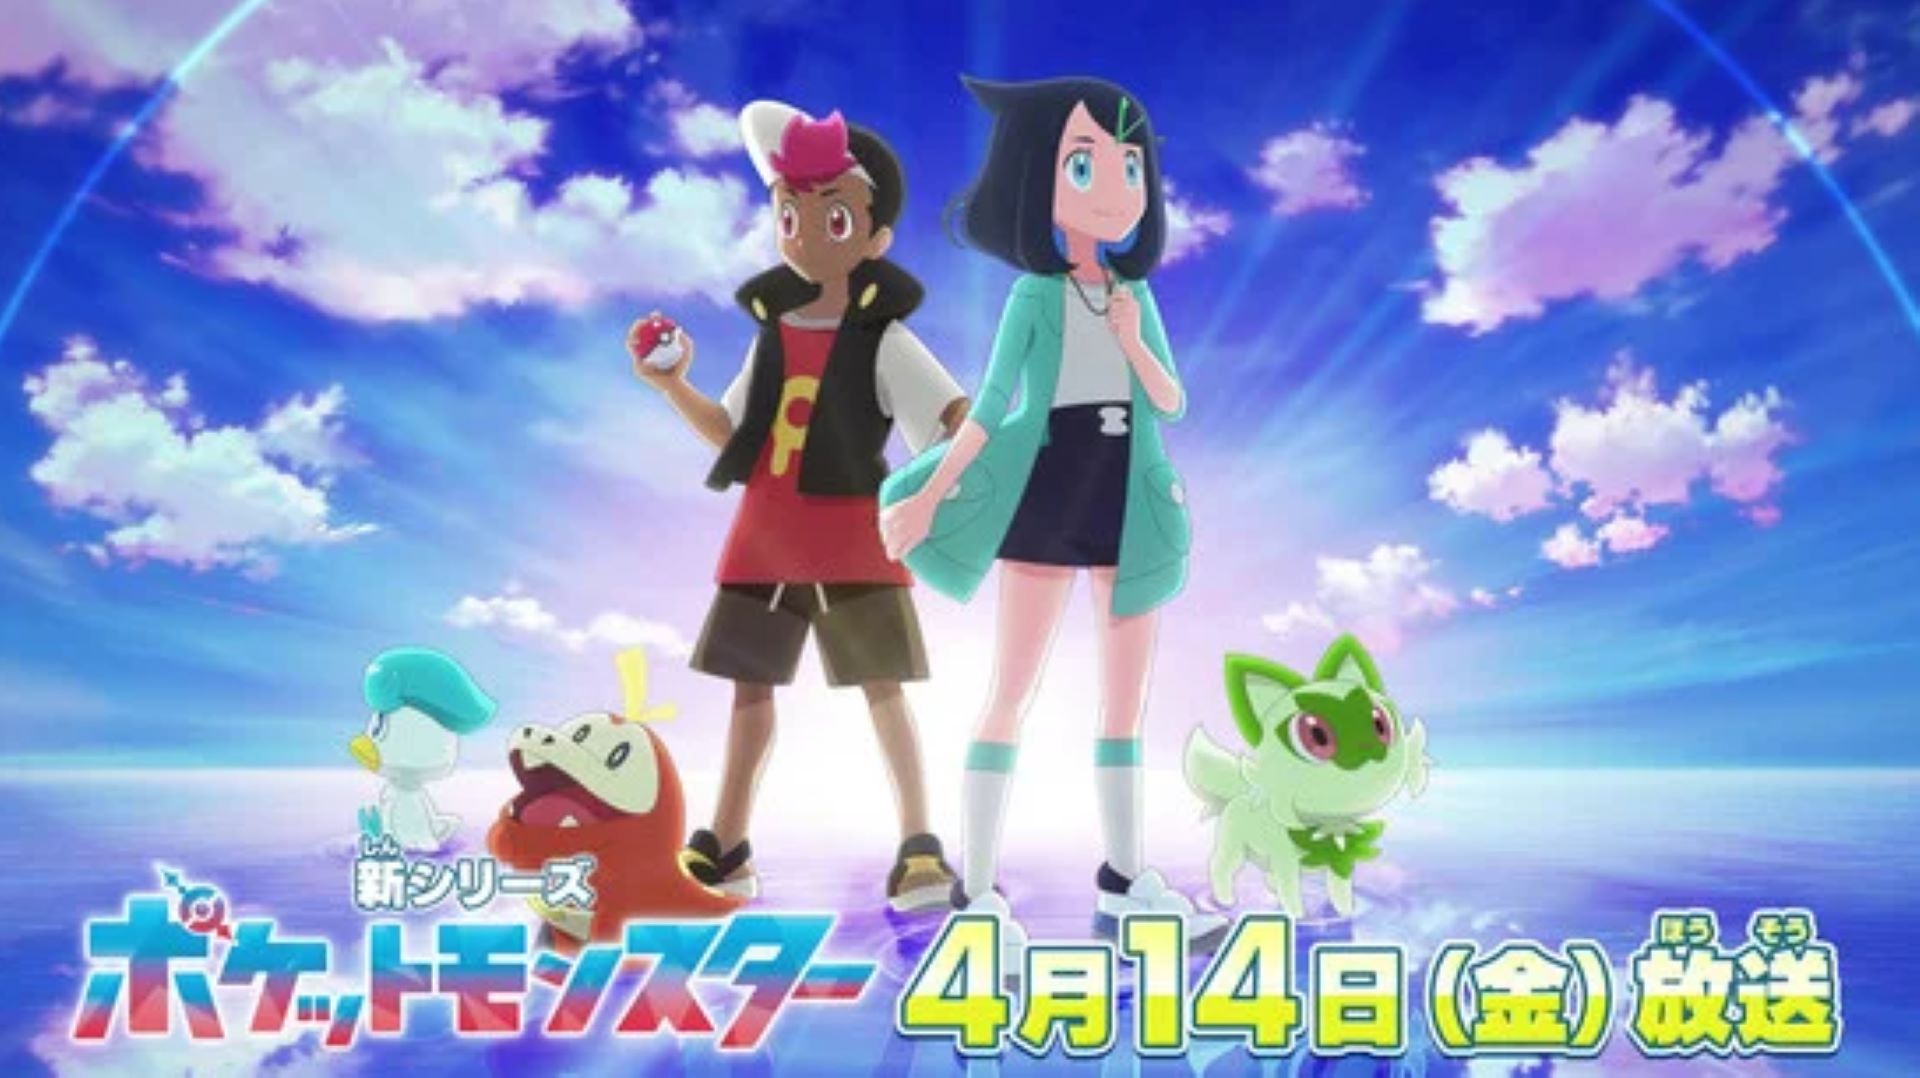 Pokémon replaces Ash in first trailer for new series